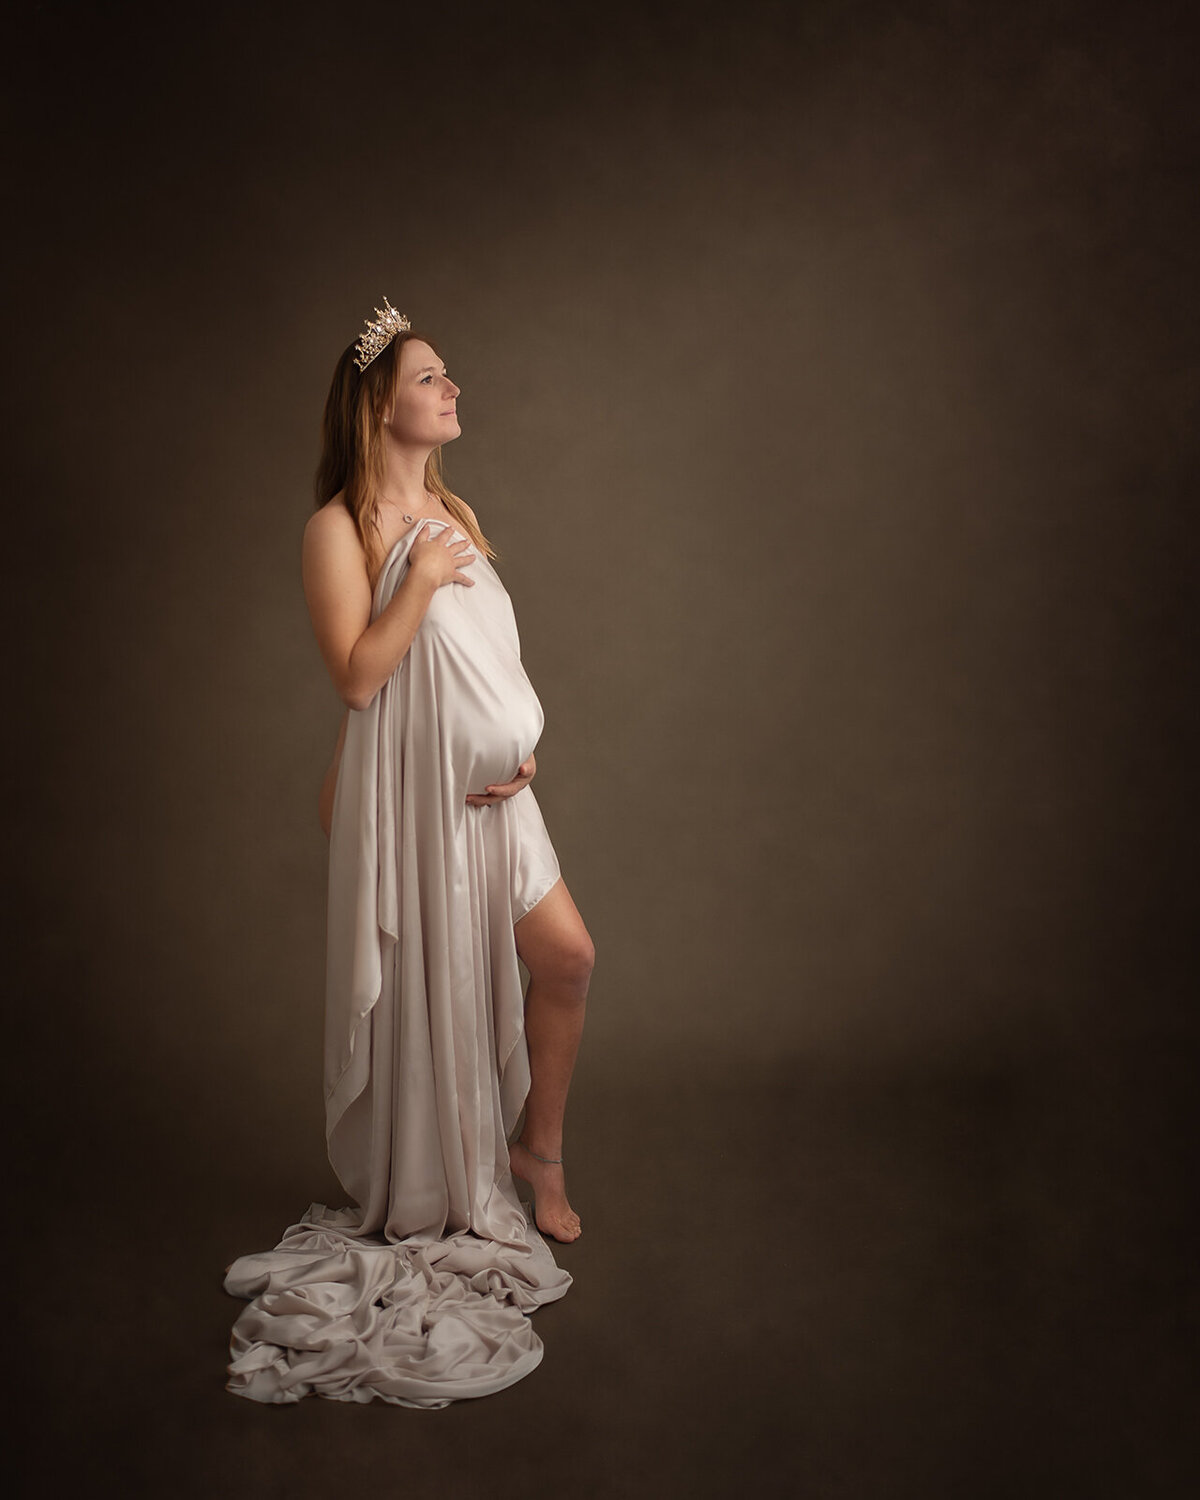 pregnant woman with drapped fabric over belly and crown on at maternity photoshoot